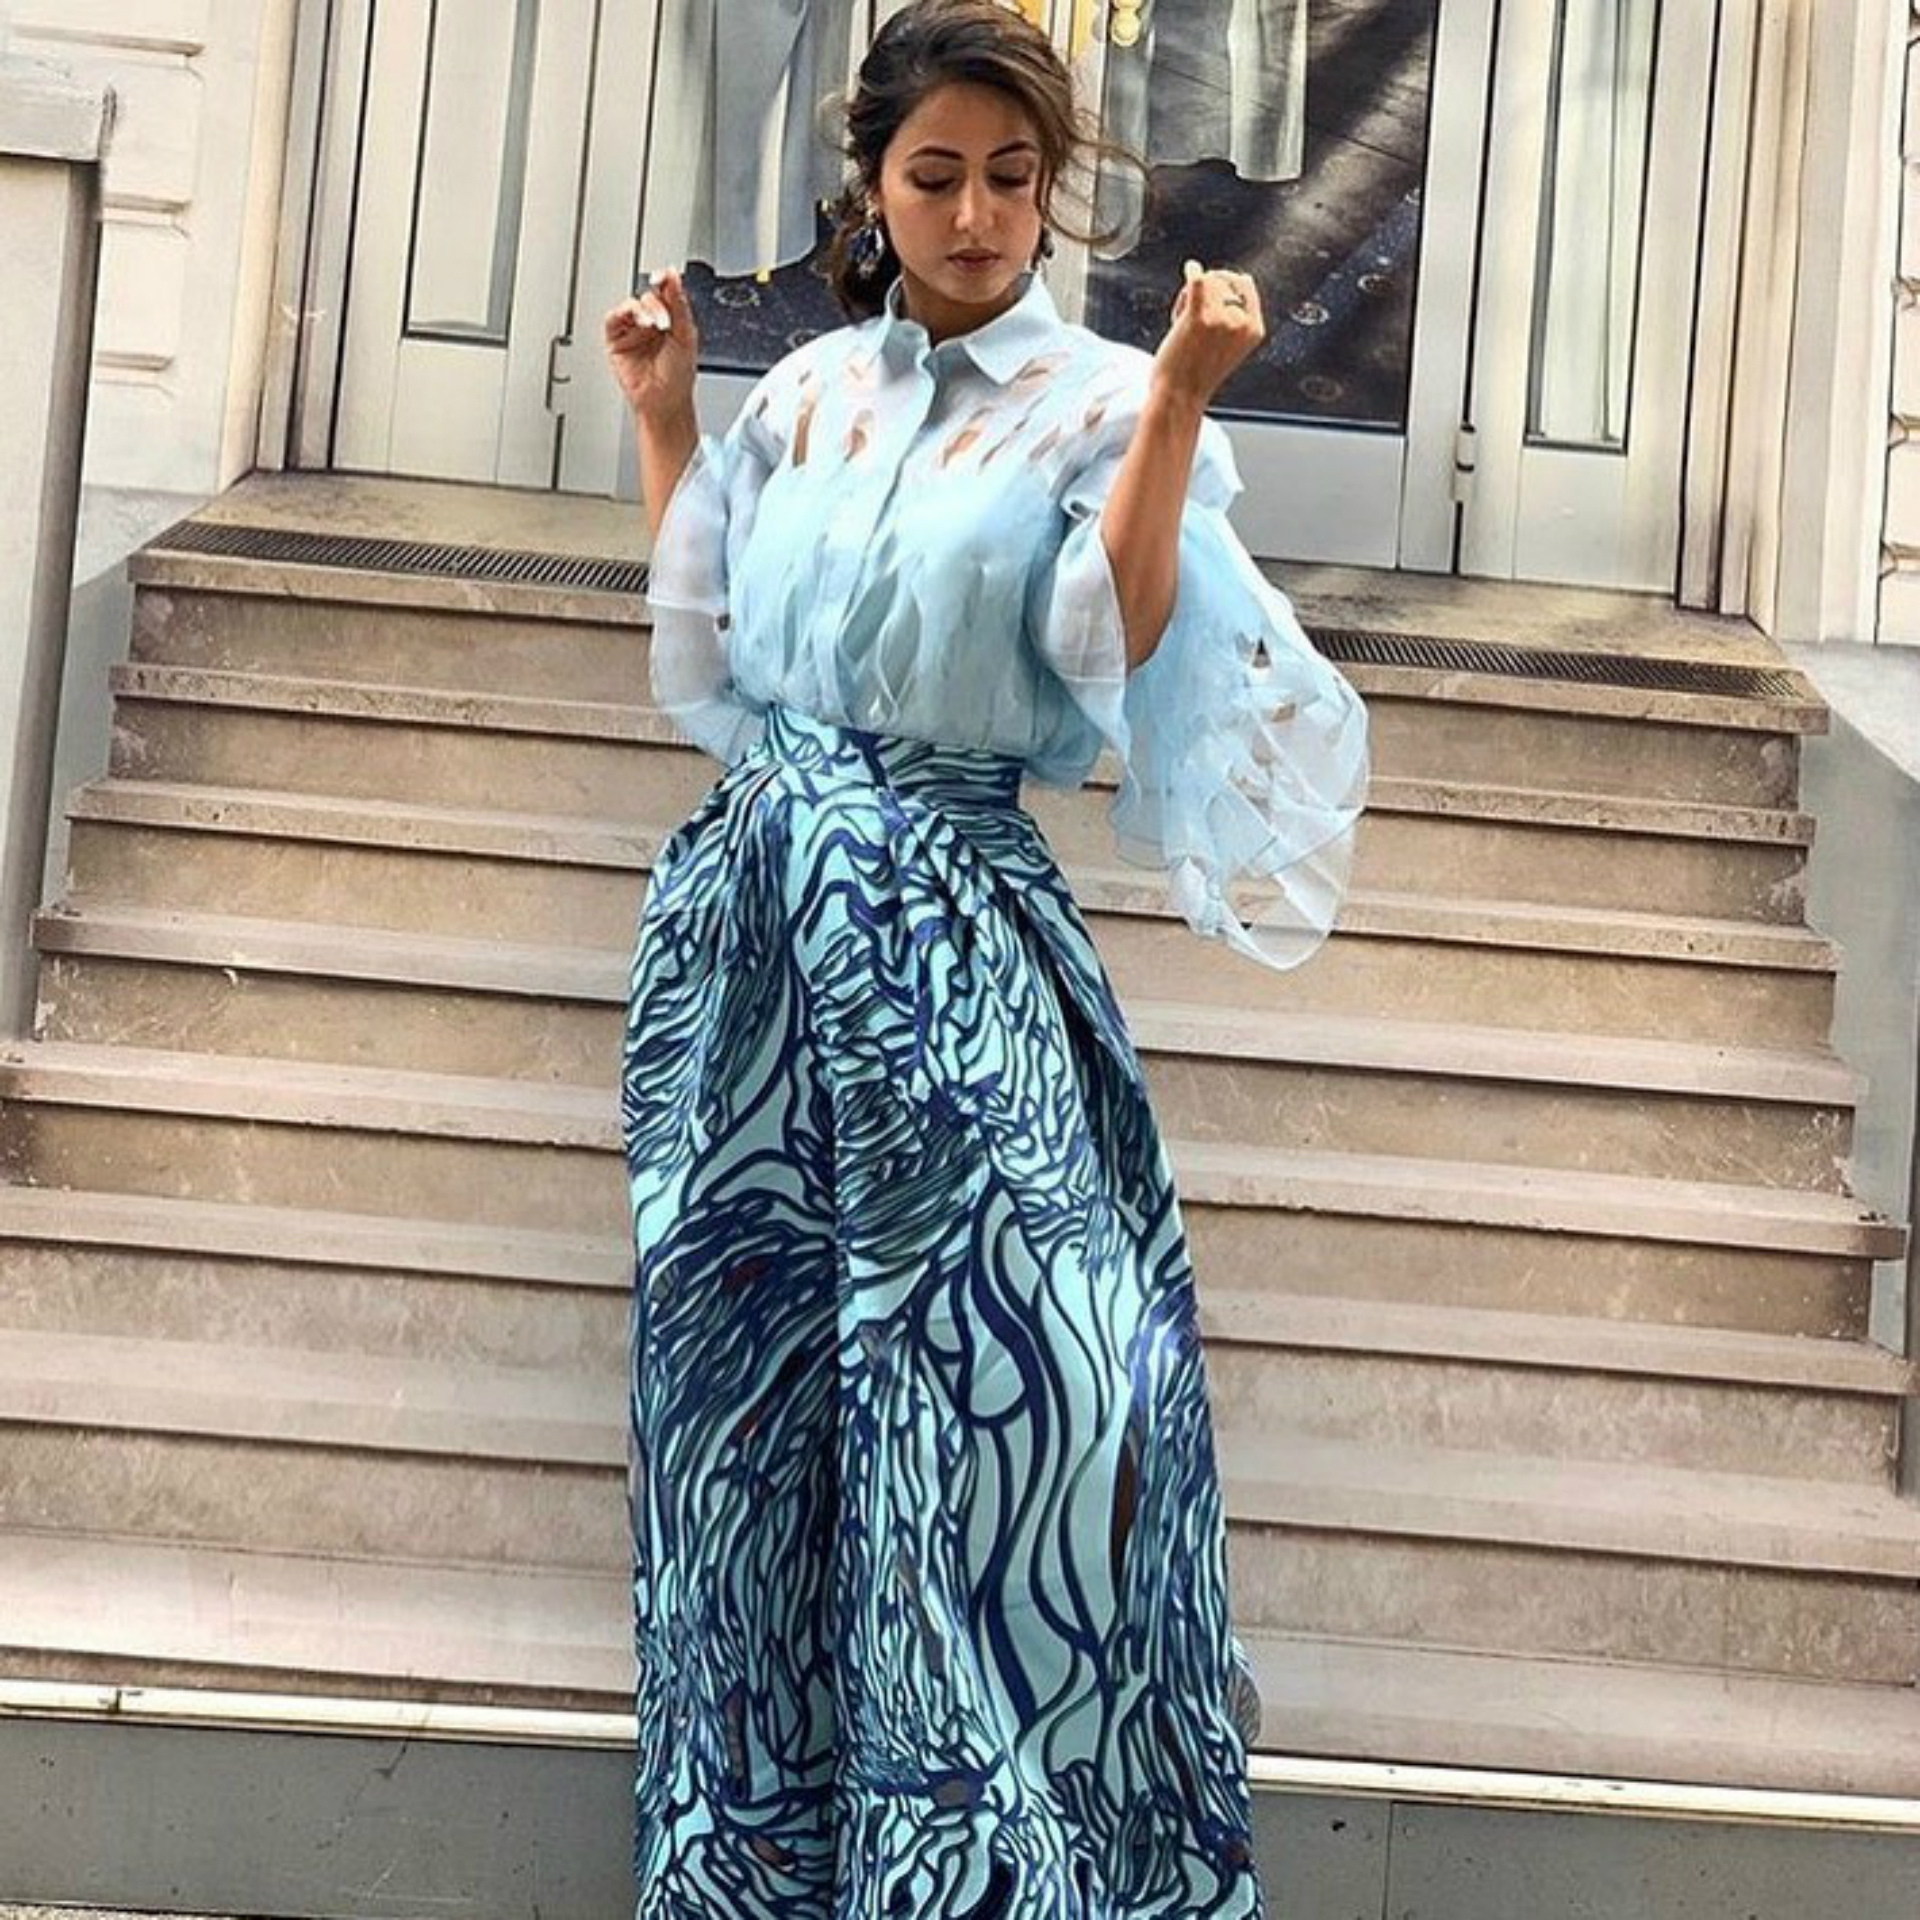 Hina Khan in Rami Al Ali Official midi dress | Hina Khan Stuns at Cannes  2019: Indian TV Star's Debut at Festival de Cannes Makes Heads Turn |  Latest Photos, Images &